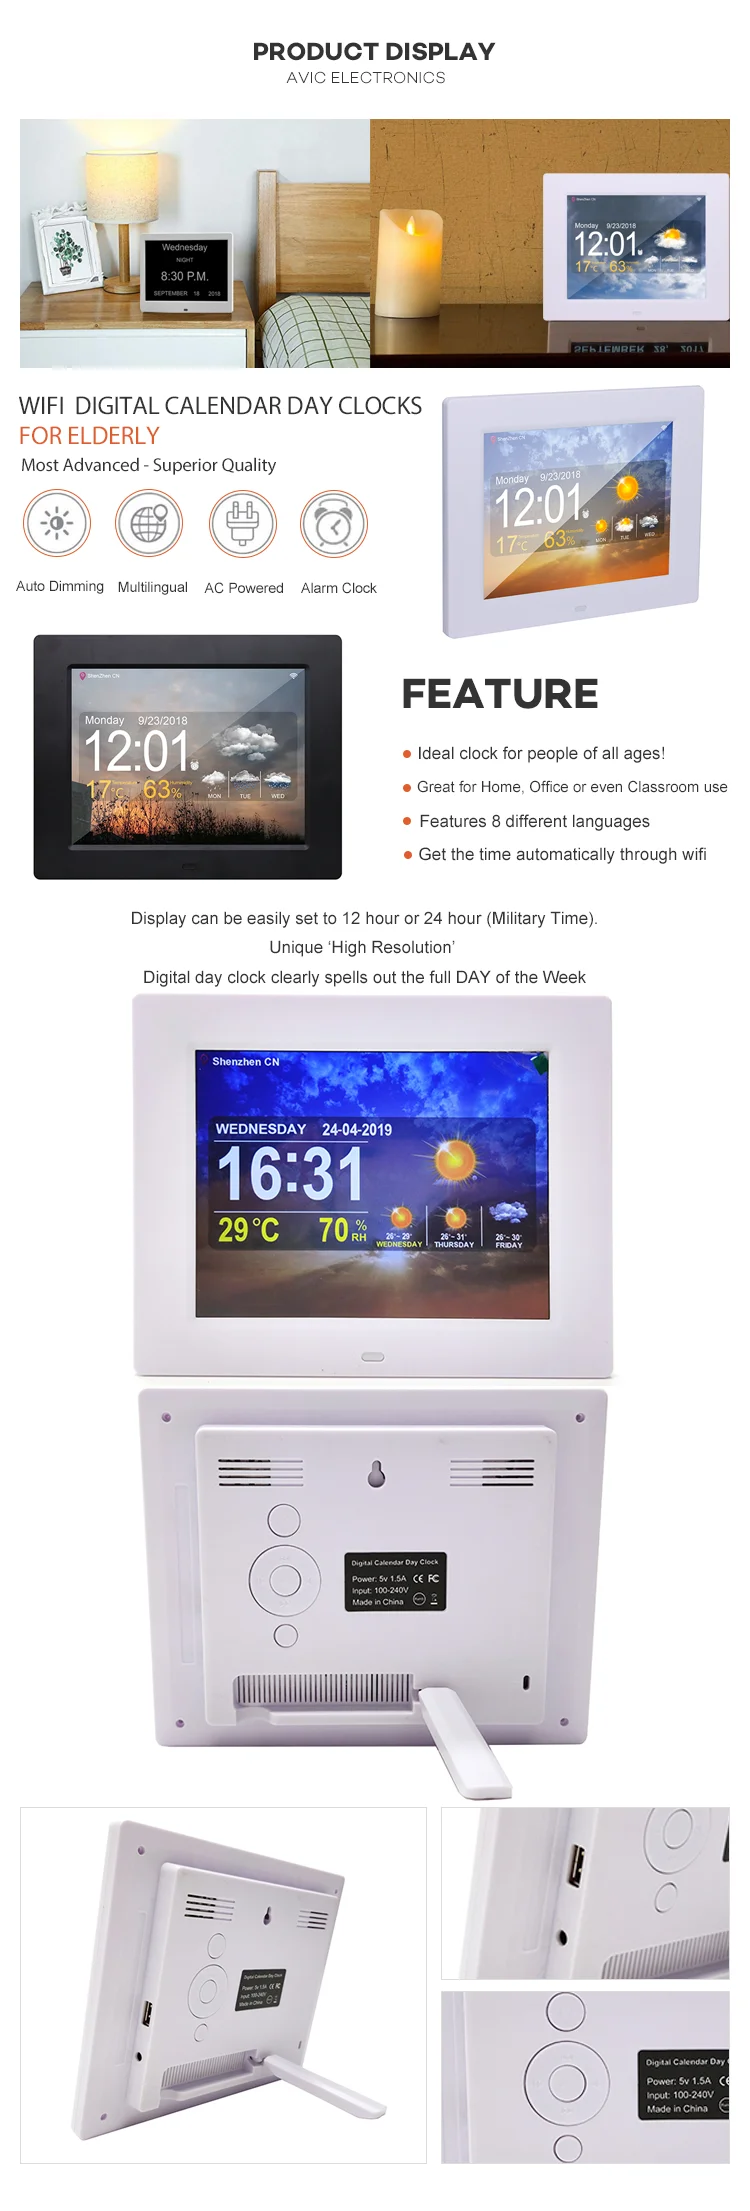 8 Inch Vision Impaired With Battery Backup & 3 Mode Option Station Meteo Wifi Digital Calendar Clock